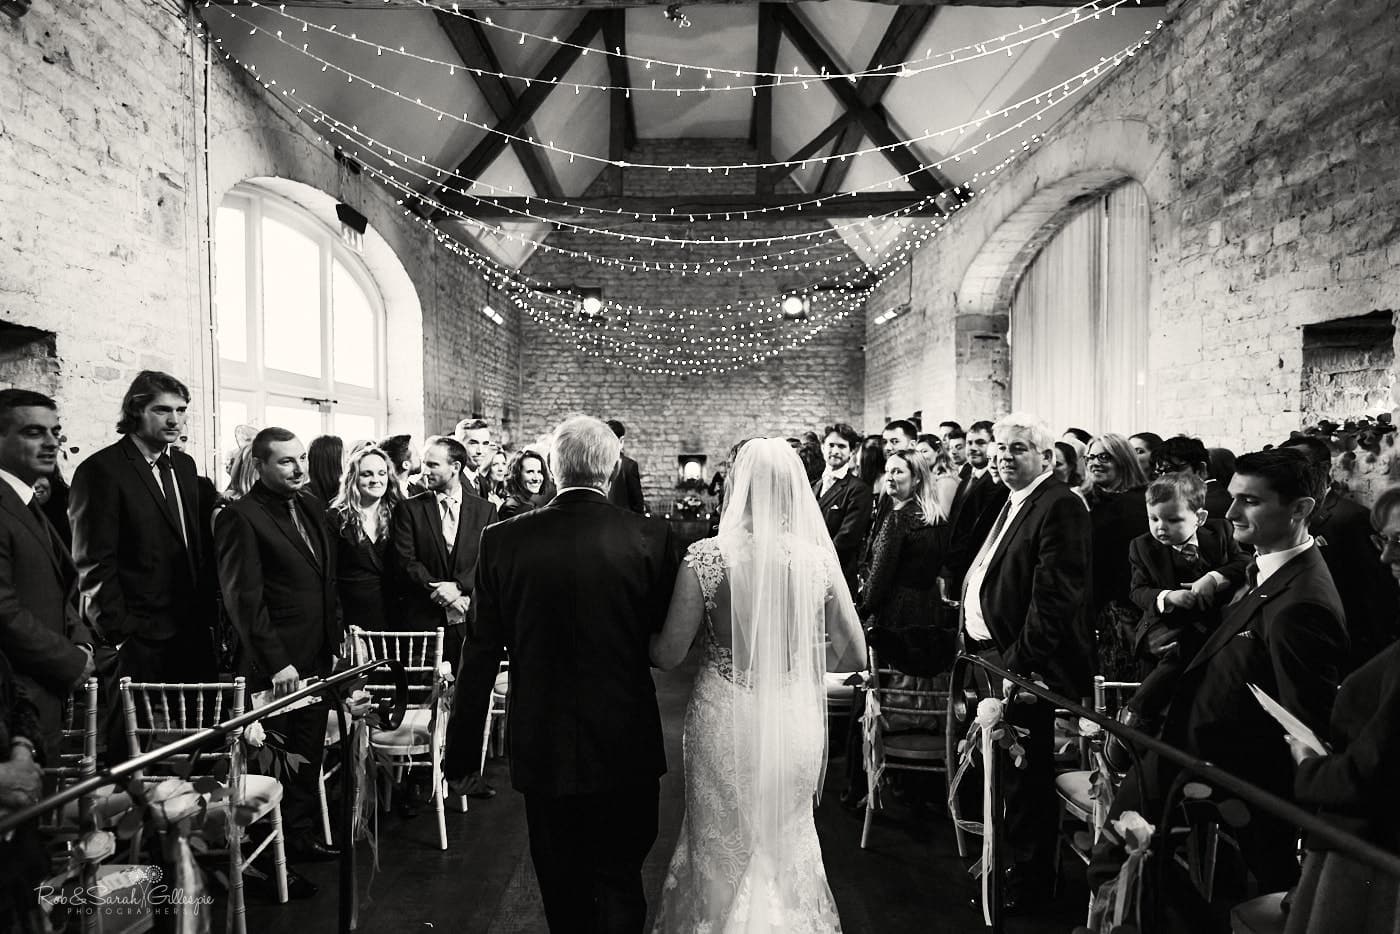 Bride and father walk up aisle as wedding guests watch